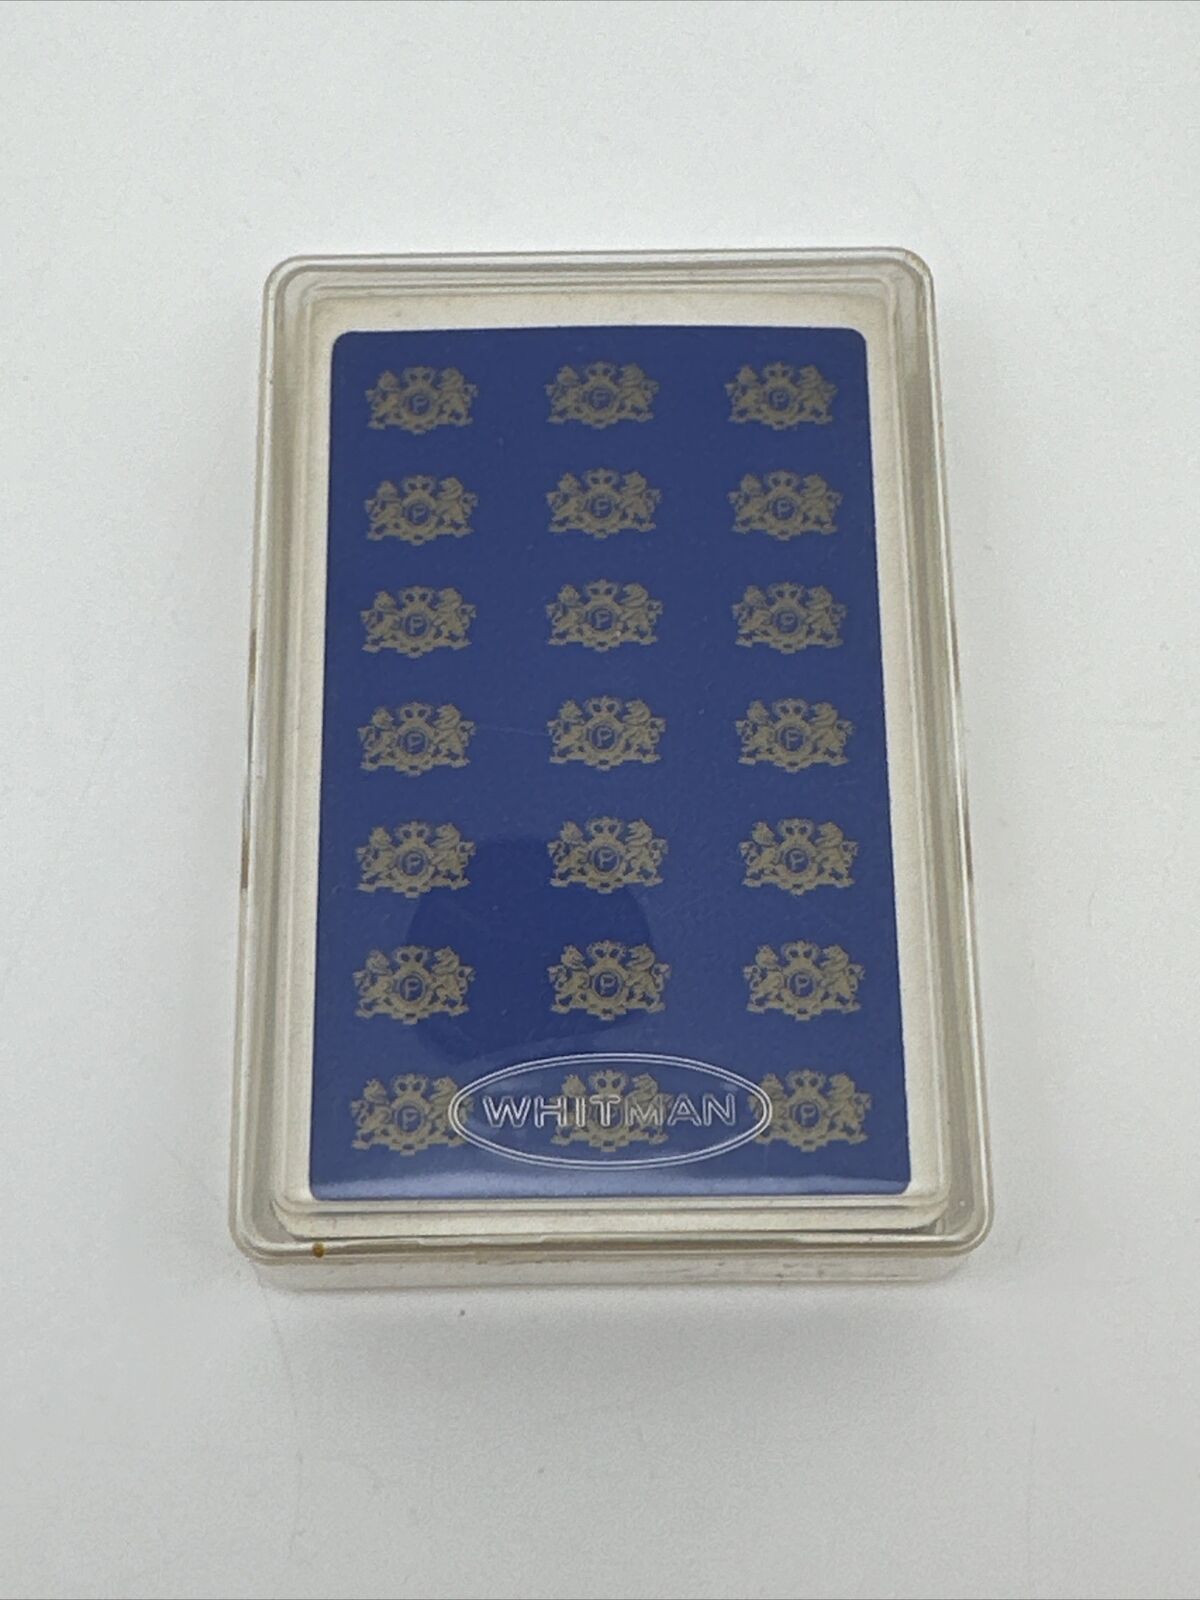 Vintage Parliament Cigarettes Whitman Playing Cards Plastic Case…97